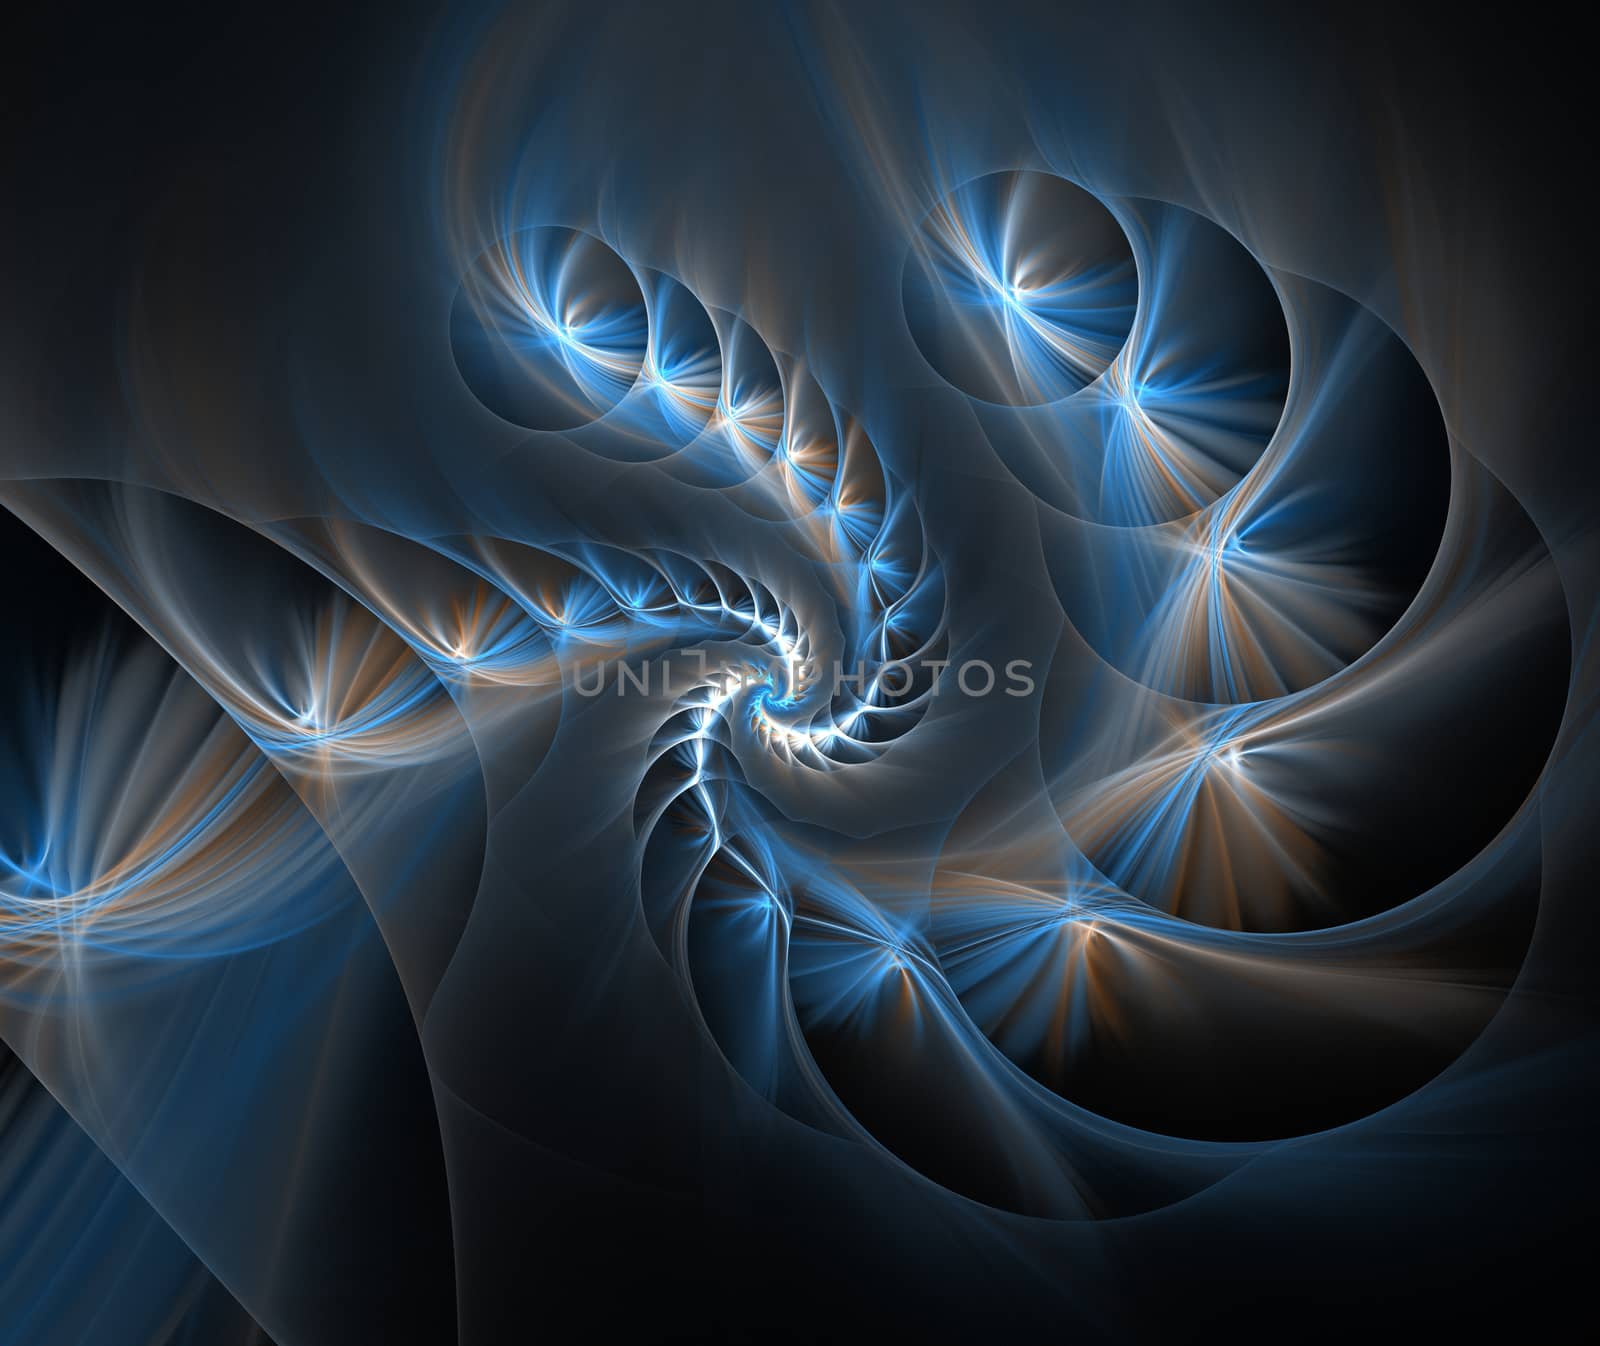 An abstract computer generated modern fractal design on dark background. Abstract fractal color texture. Digital art. Abstract Form & Colors. Spinning vortex holes